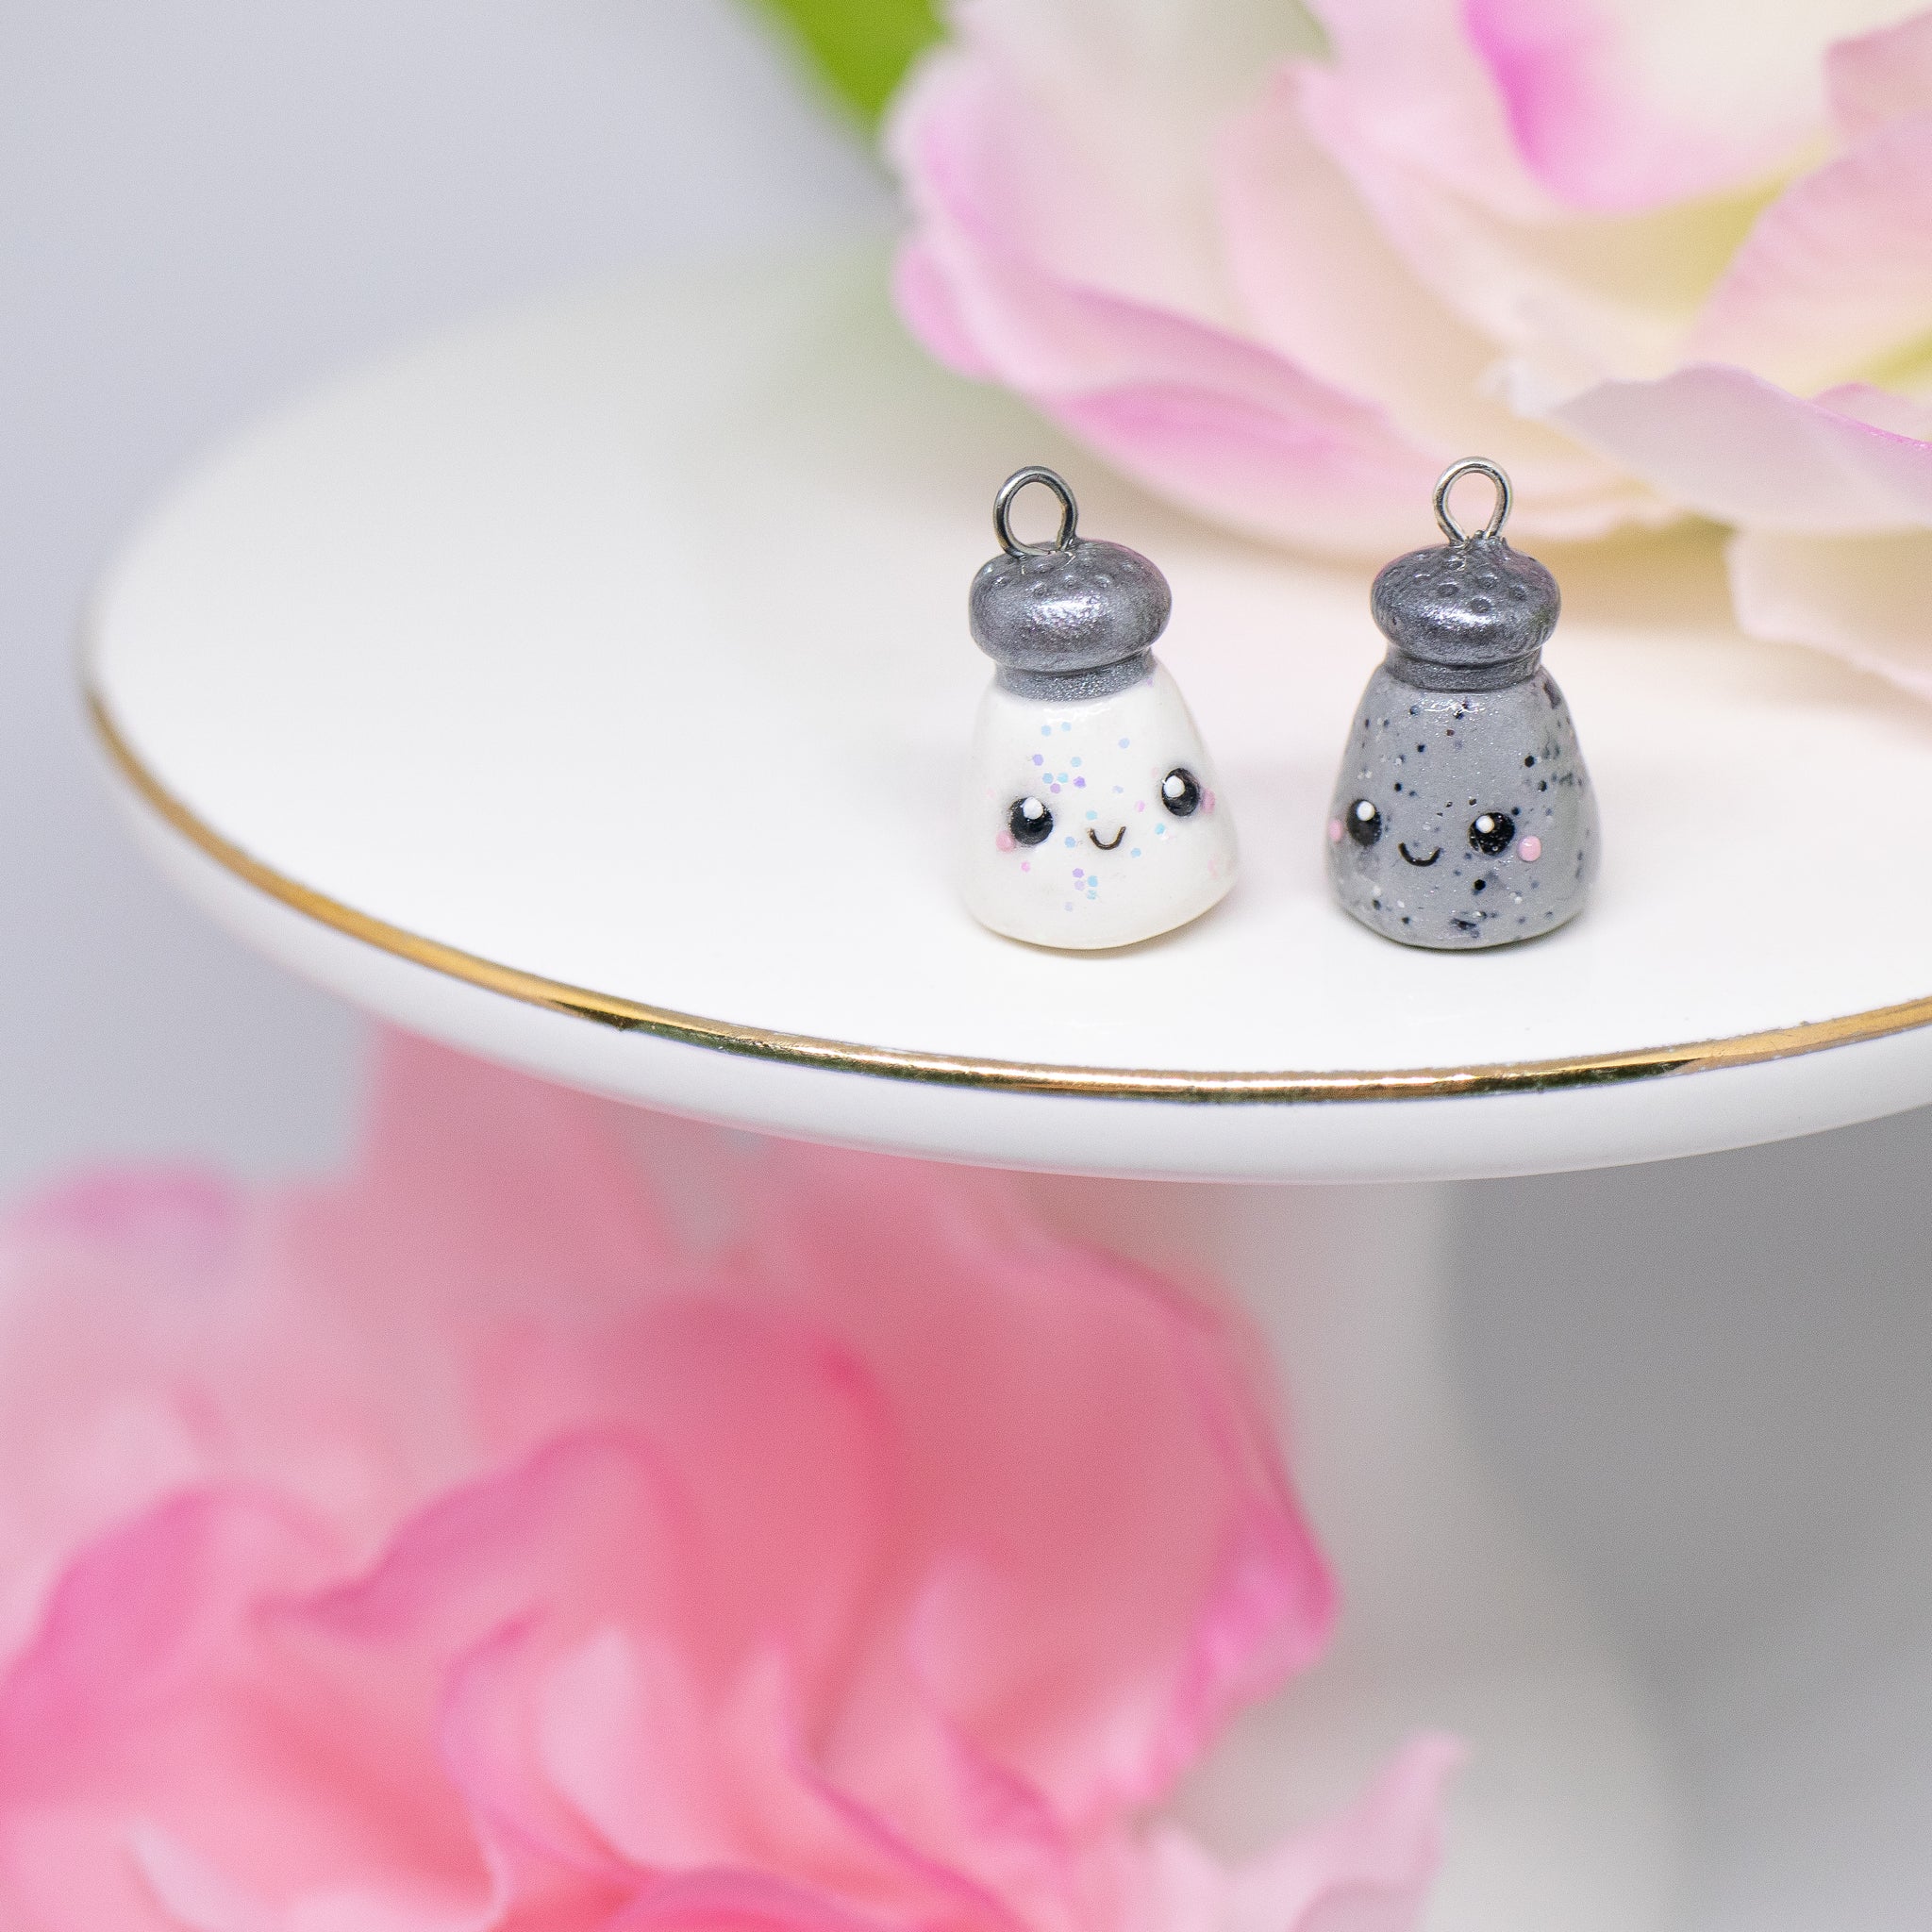 SALT and PEPPER SHAKERS Best Friends Pendant. Kawaii Besties on Necklace  Book Mark Key Ring Polymer Clay 